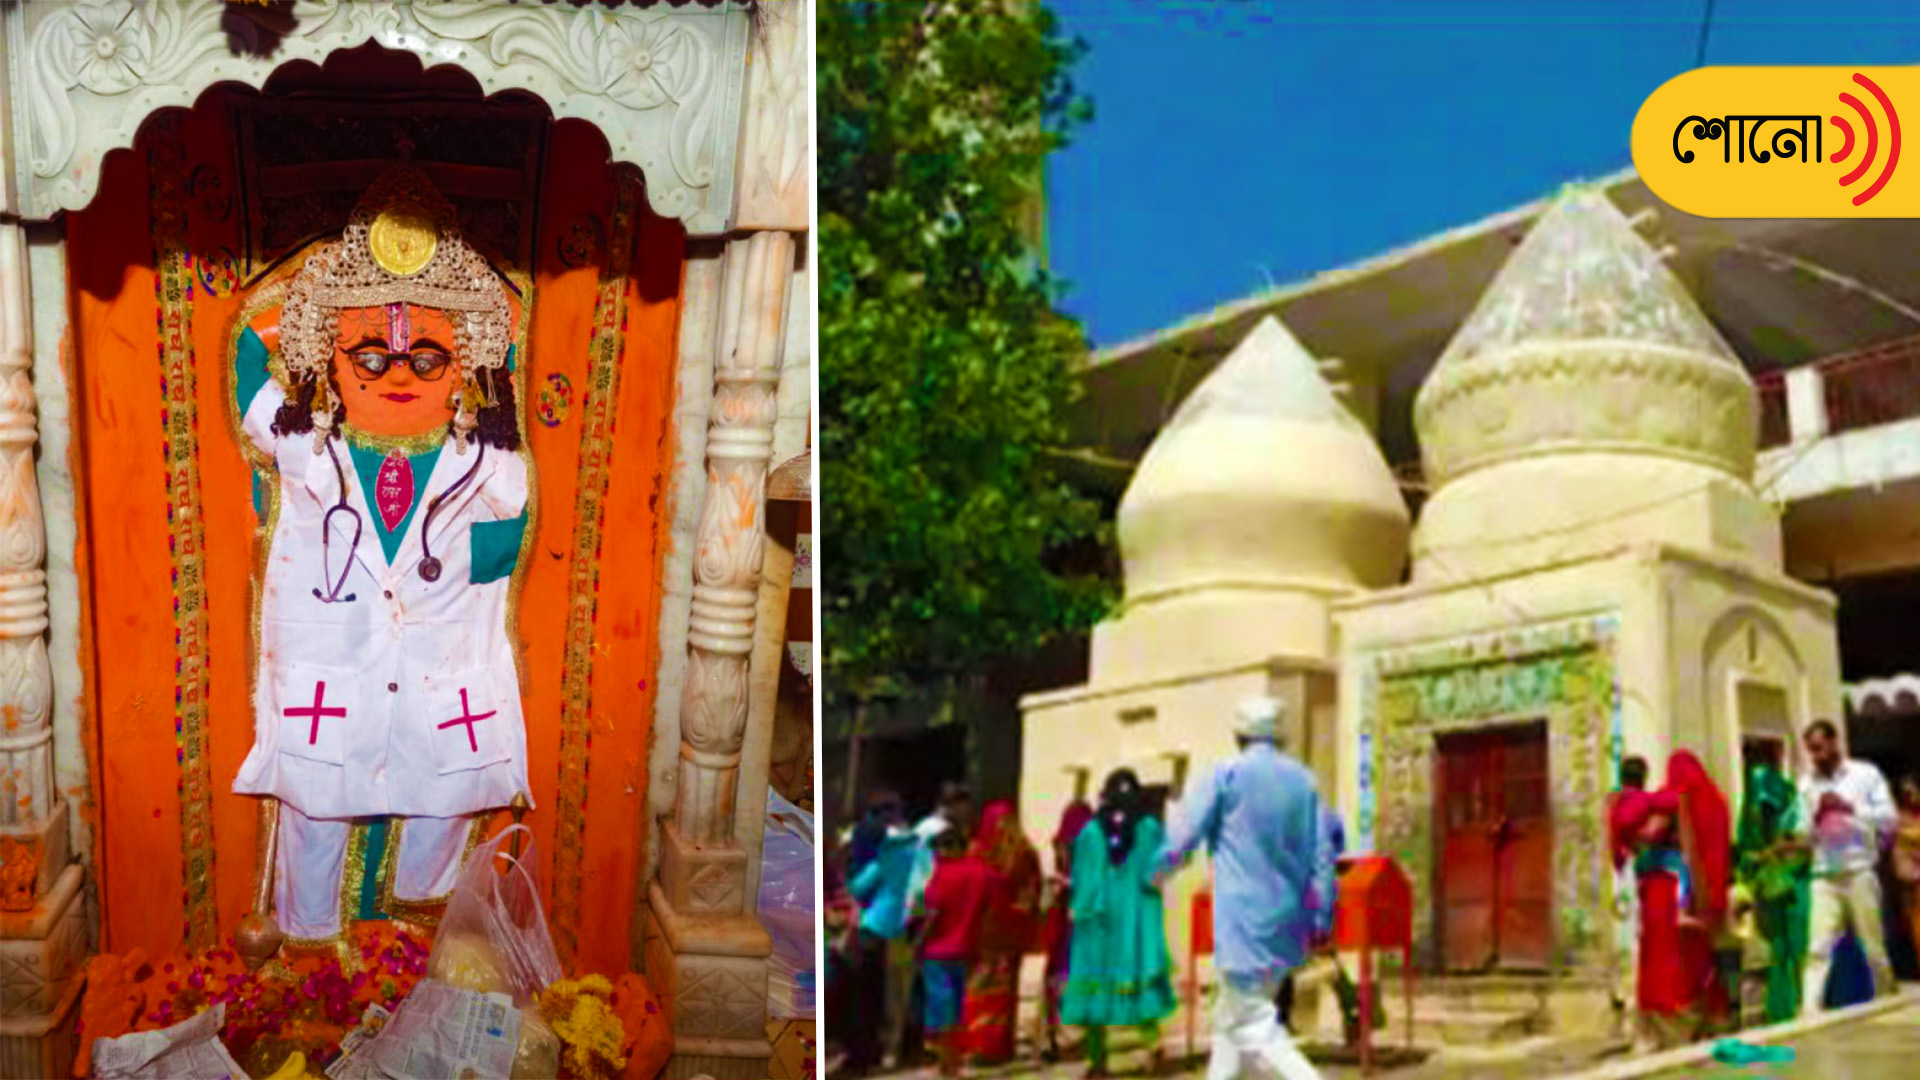 know more about the Doctor Hanuman Temple in MP